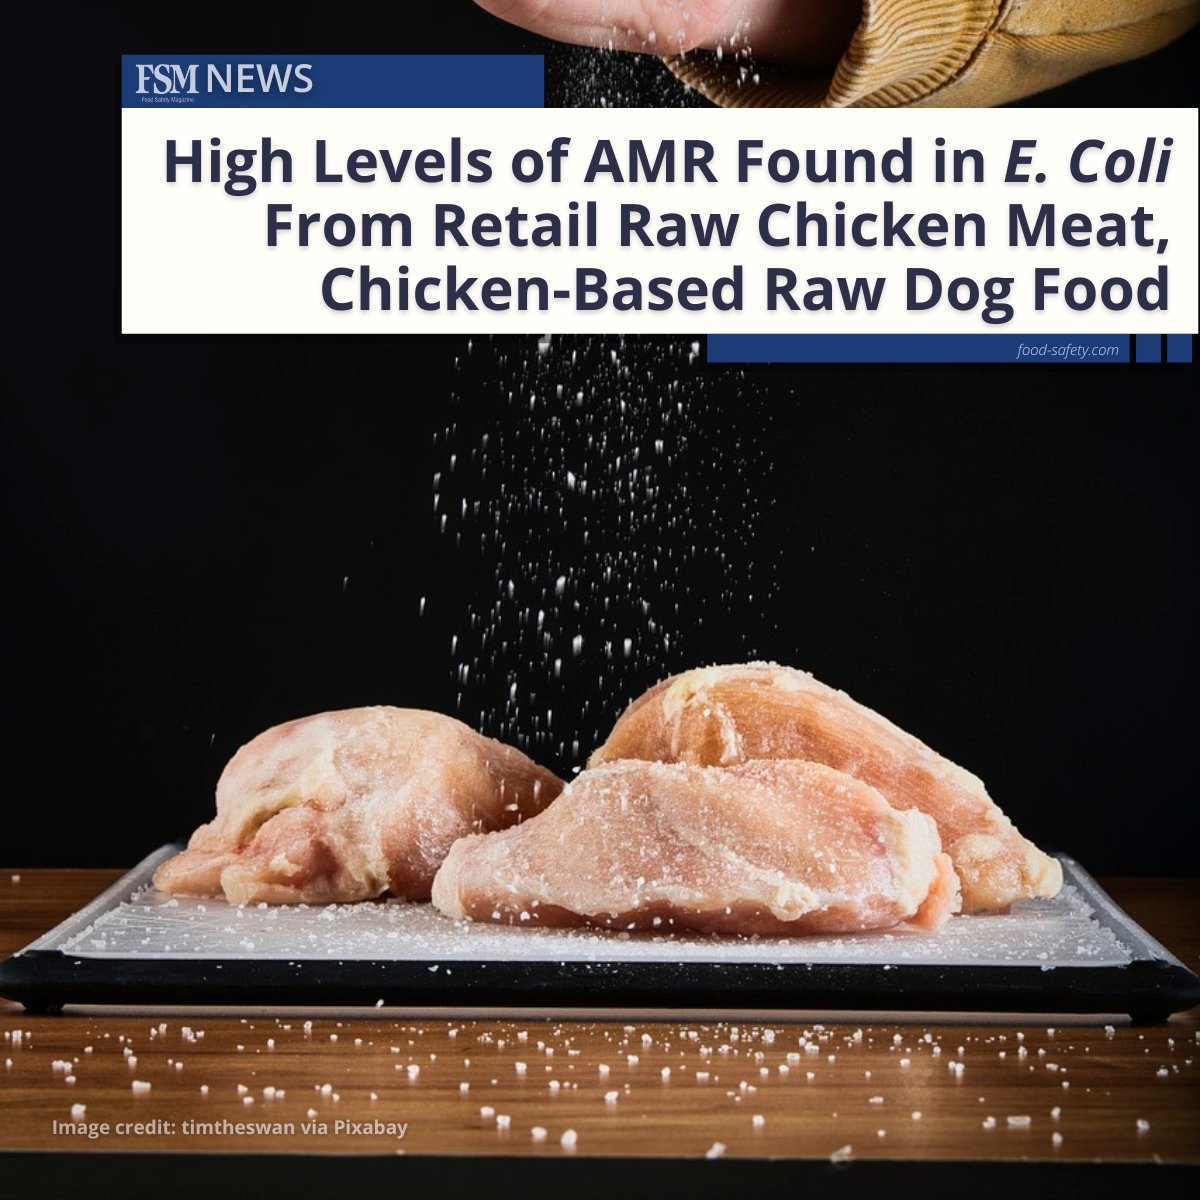 About half of retail raw chicken samples and chicken-based raw dog food samples contained E. coli that was resistant to critically important antibiotics, in a recent study. 💊🍗👉 brnw.ch/21wJCal

#foodsafety #foodindustry #antimicrobialresistance #AMR #Ecoli